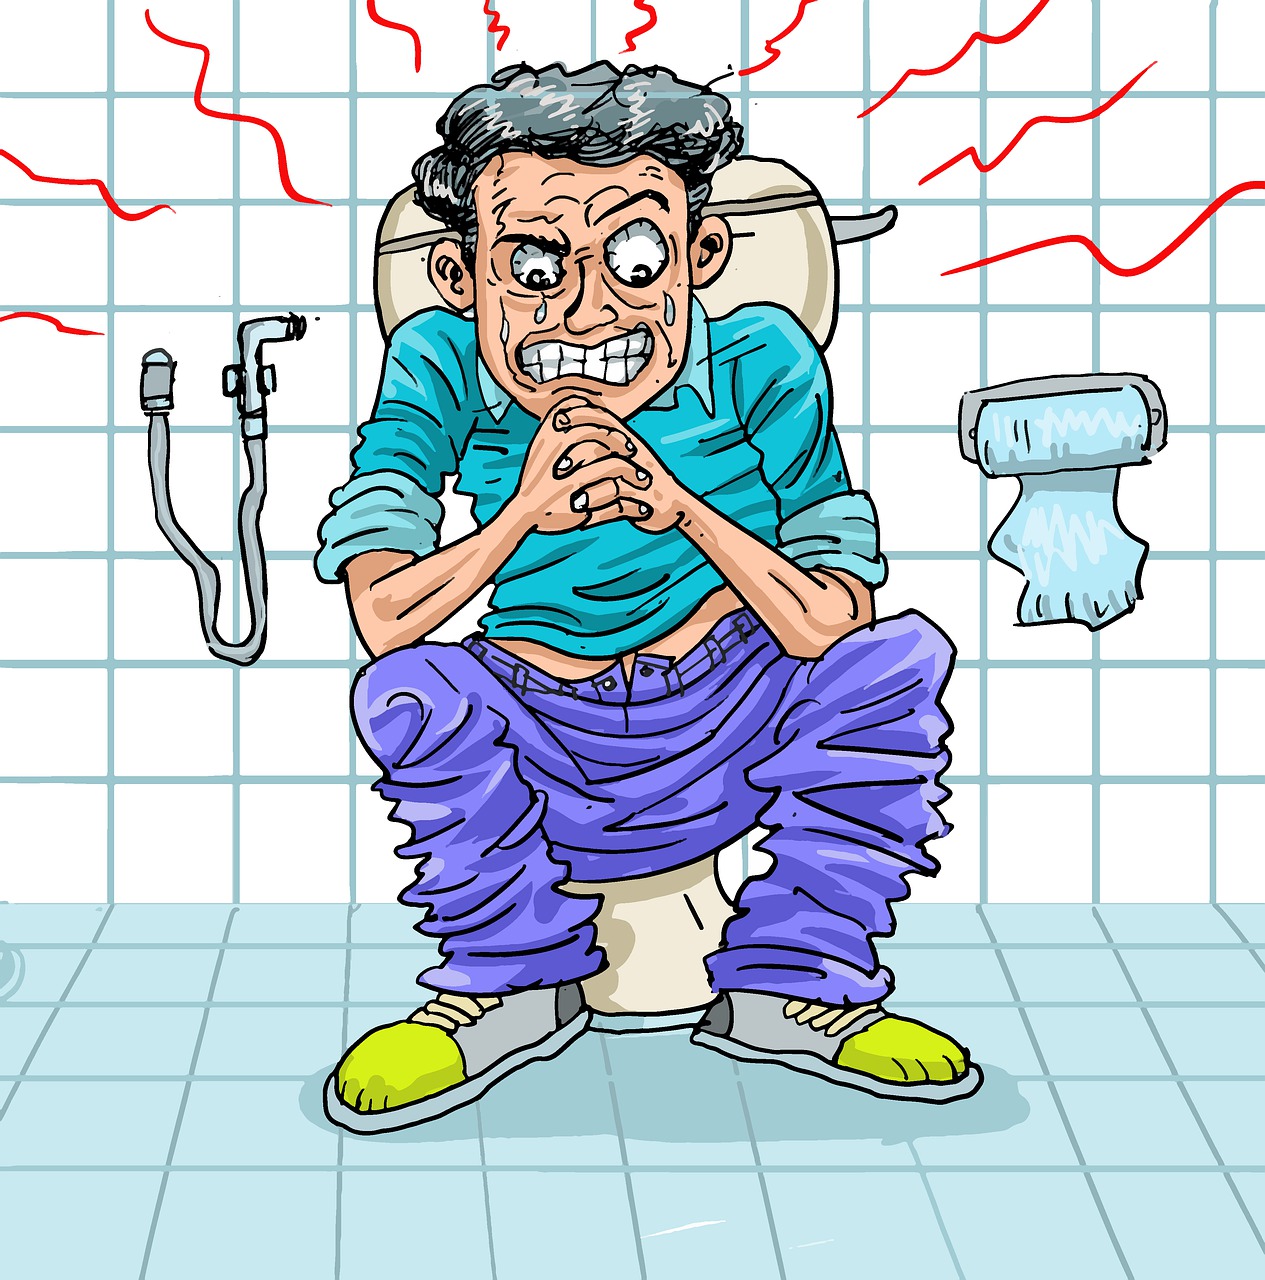 How to cure constipation at home naturally